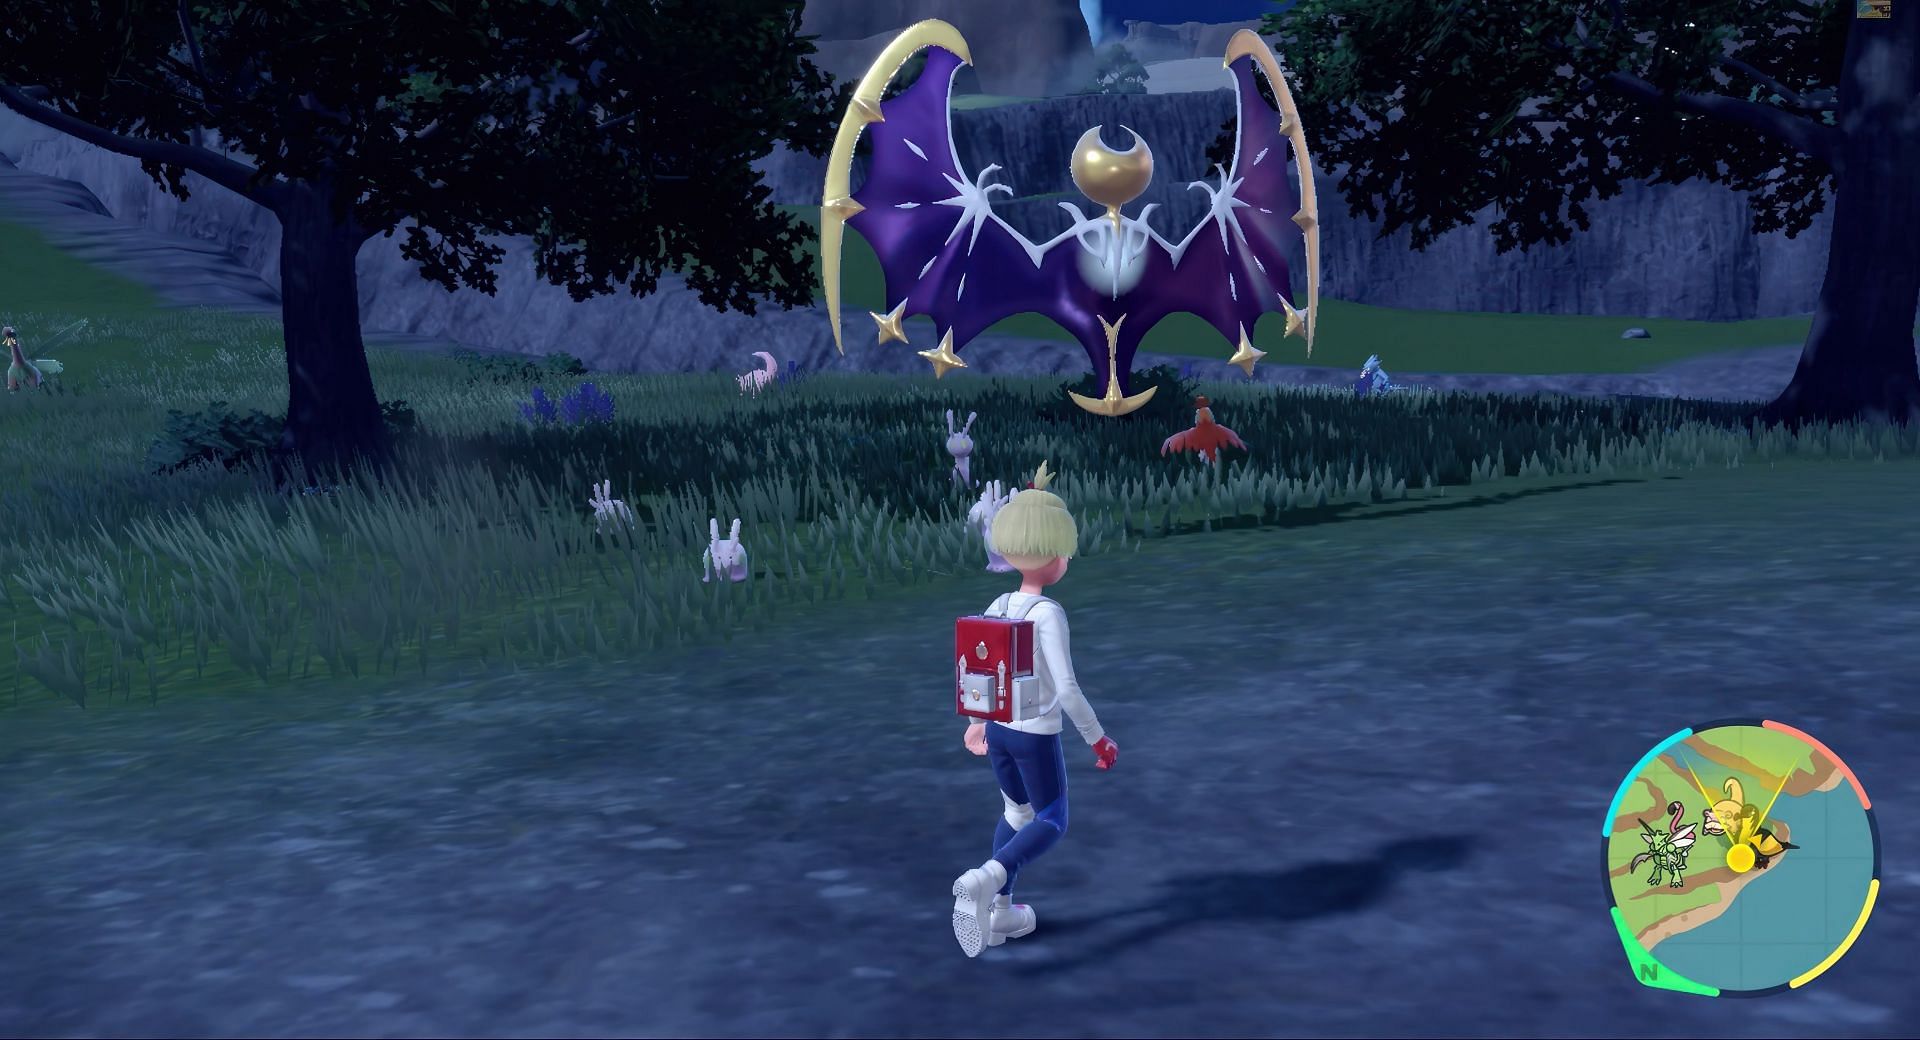 Lunala cannot be shiny in this game (Image via The Pokemon Company)